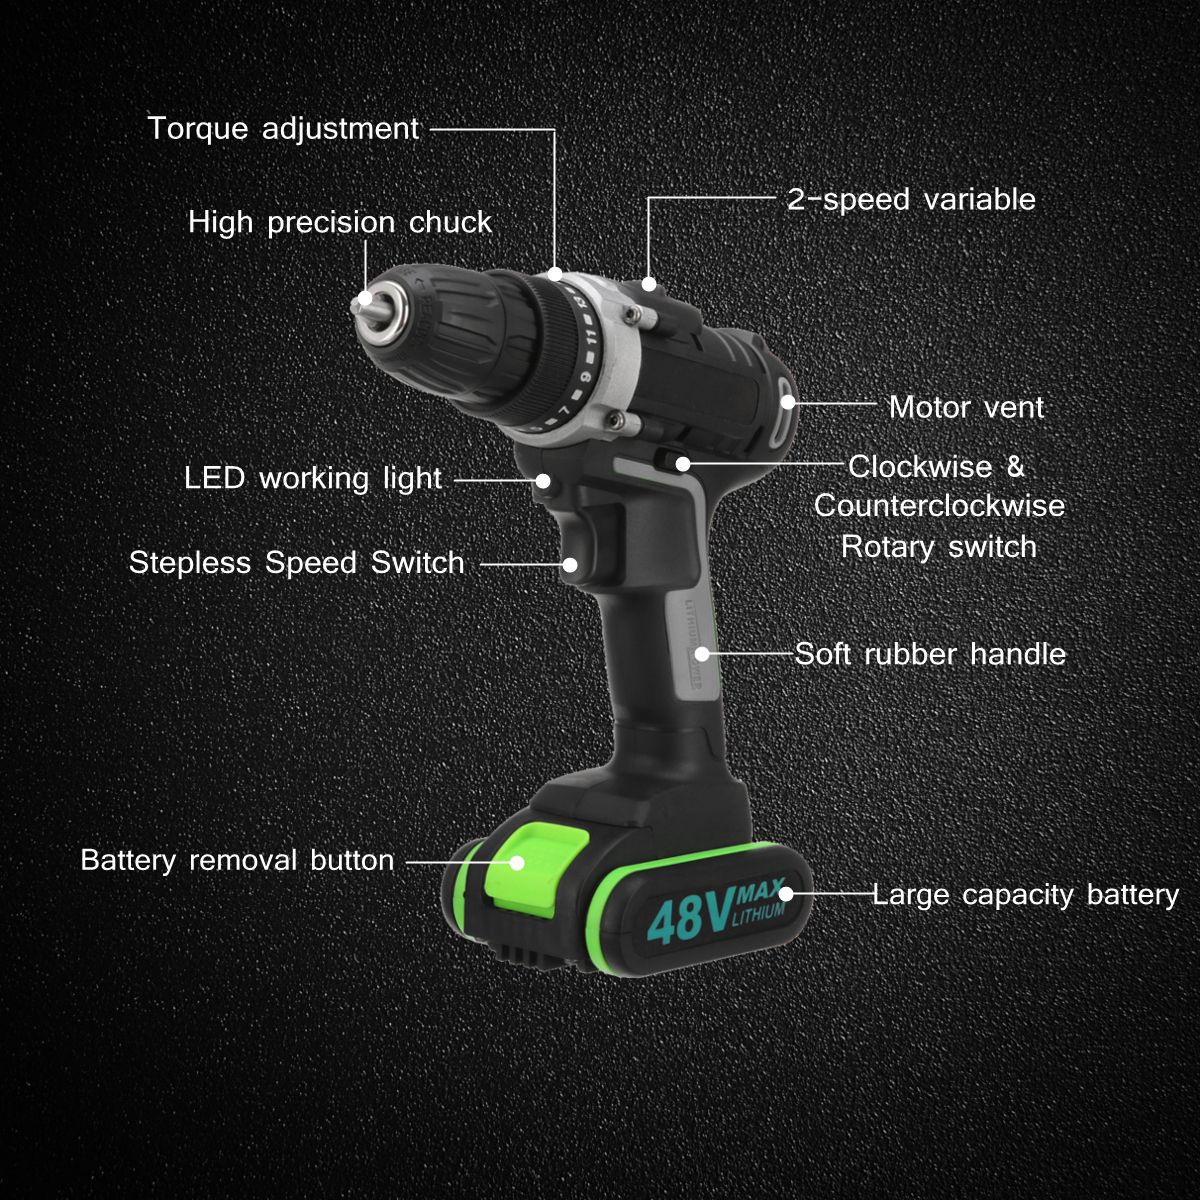 48V-18-Gear-Power-Drills-Cordless-Electric-Drill-2-Speed-LED-lighting-Powerful-Driling-Tool-1452966